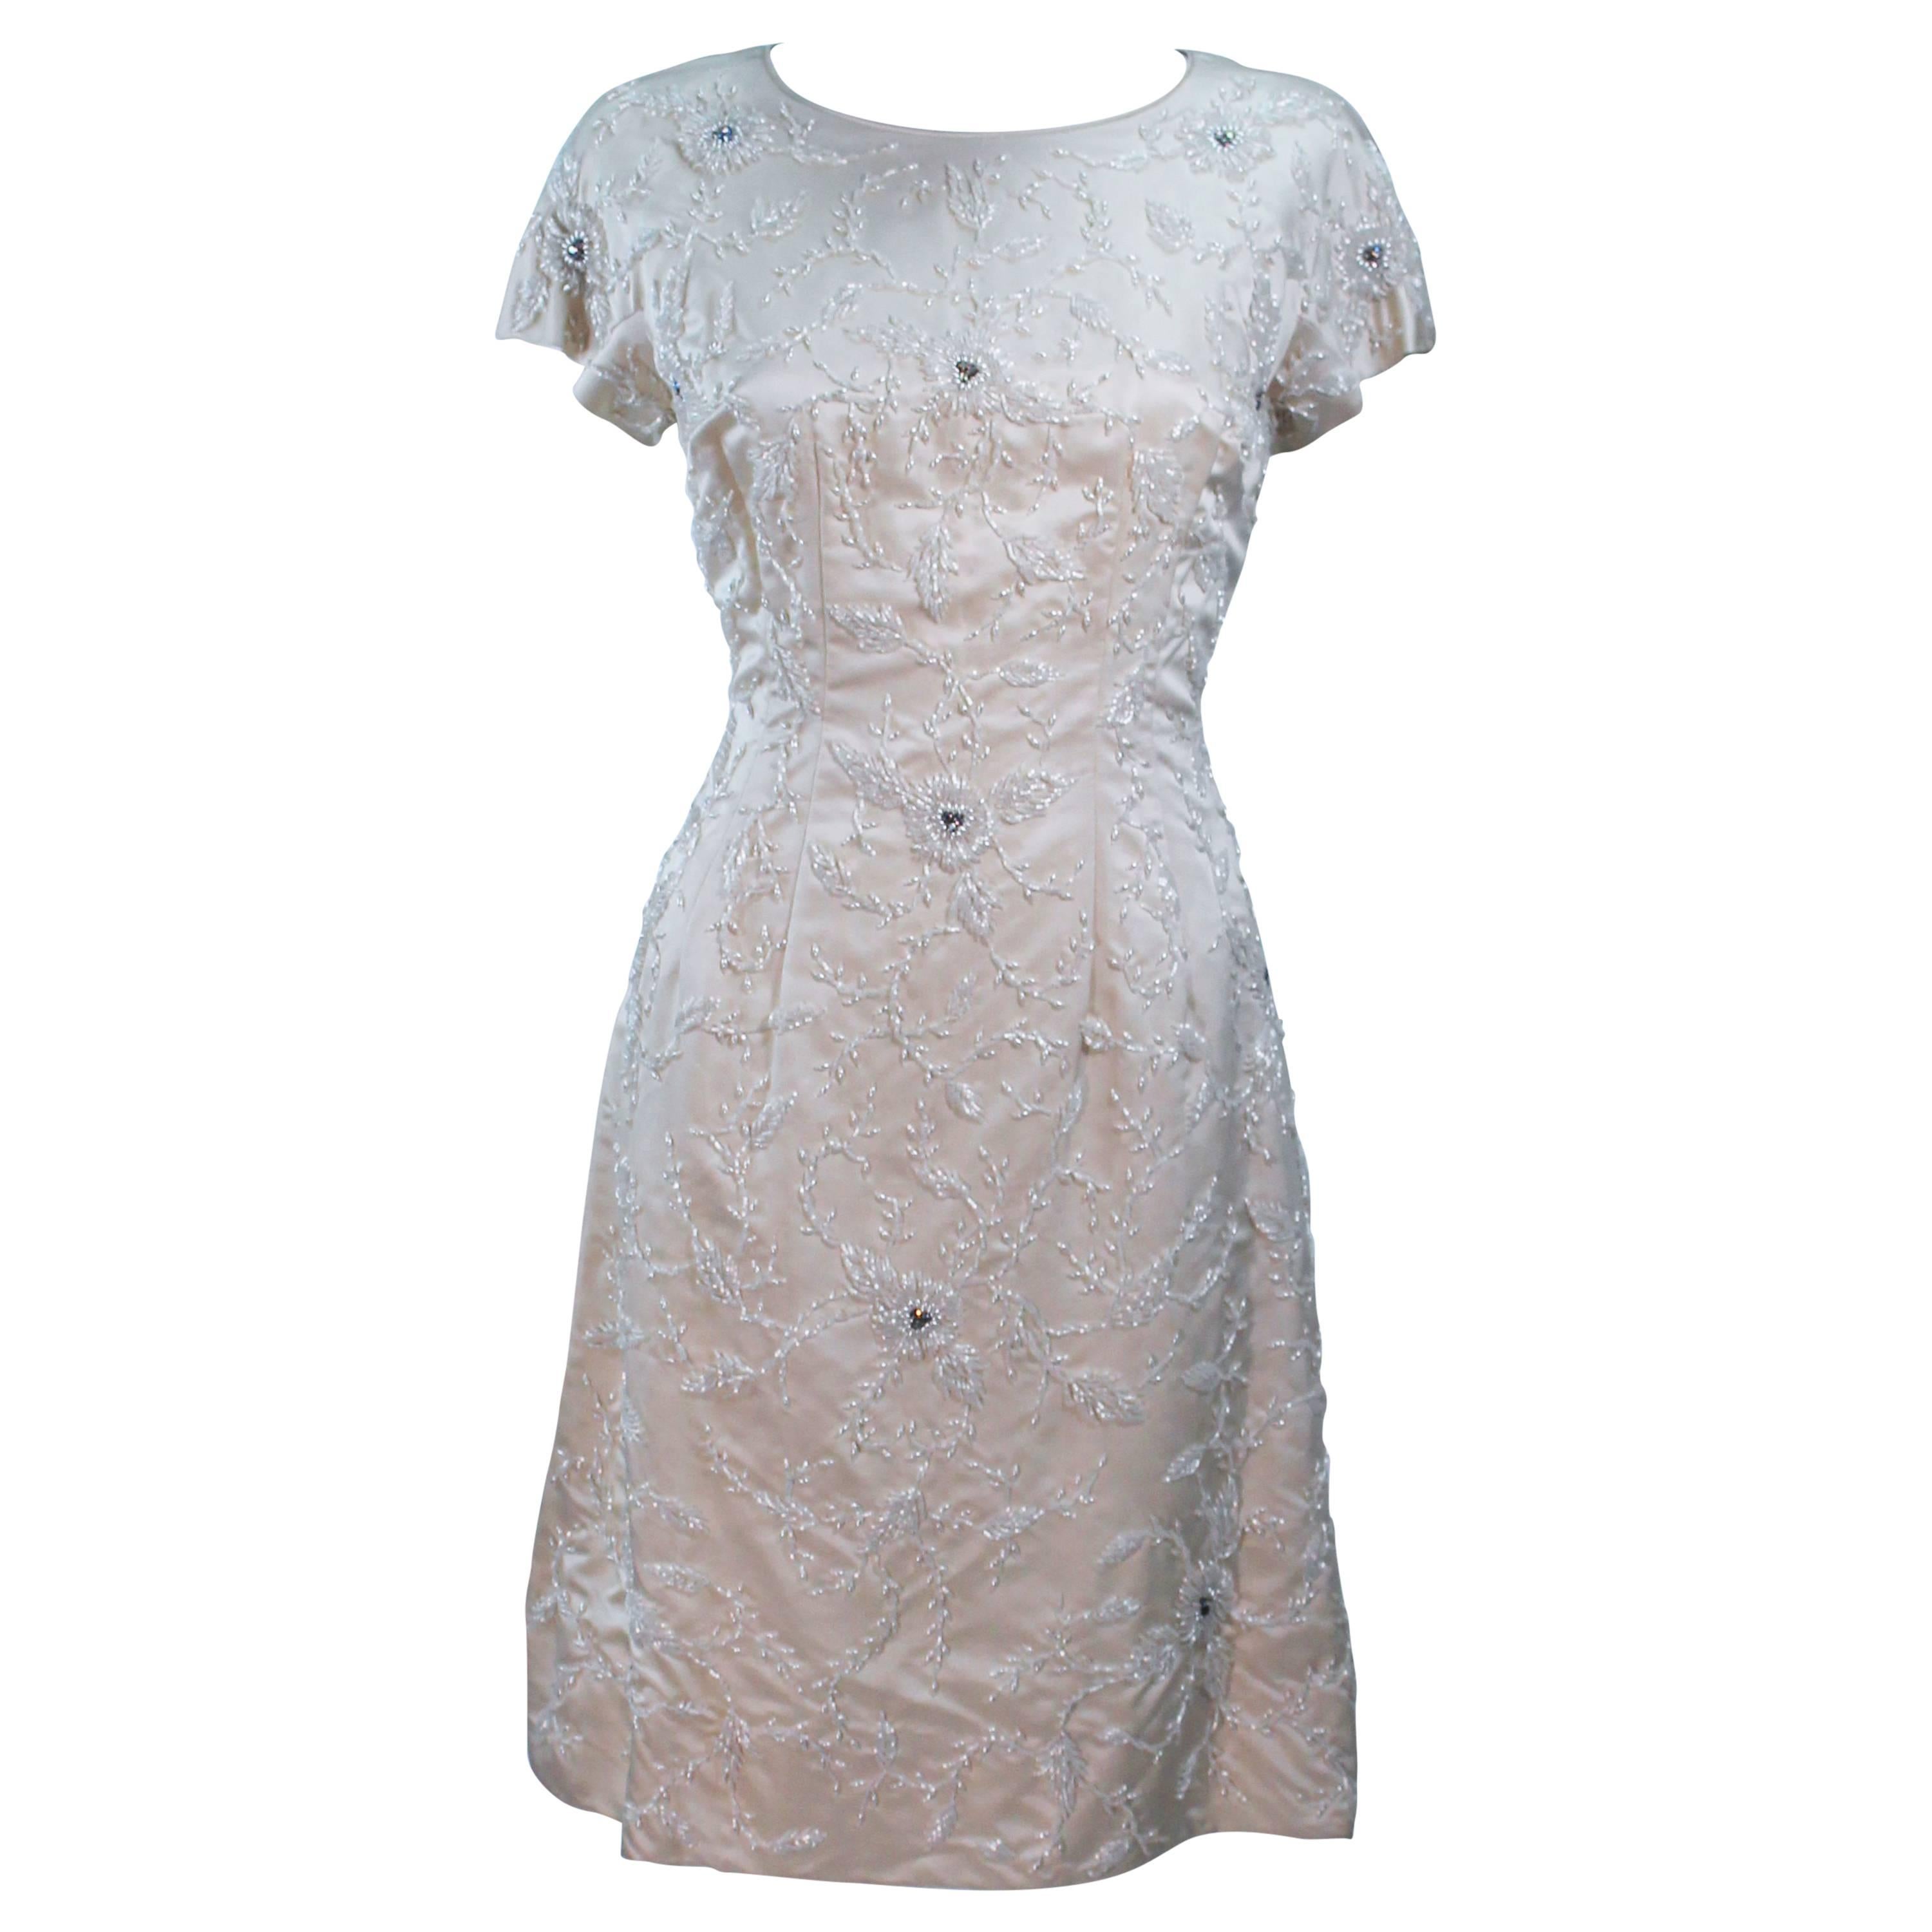 1960's Ivory Beaded Cocktail Dress Size 8-10 For Sale